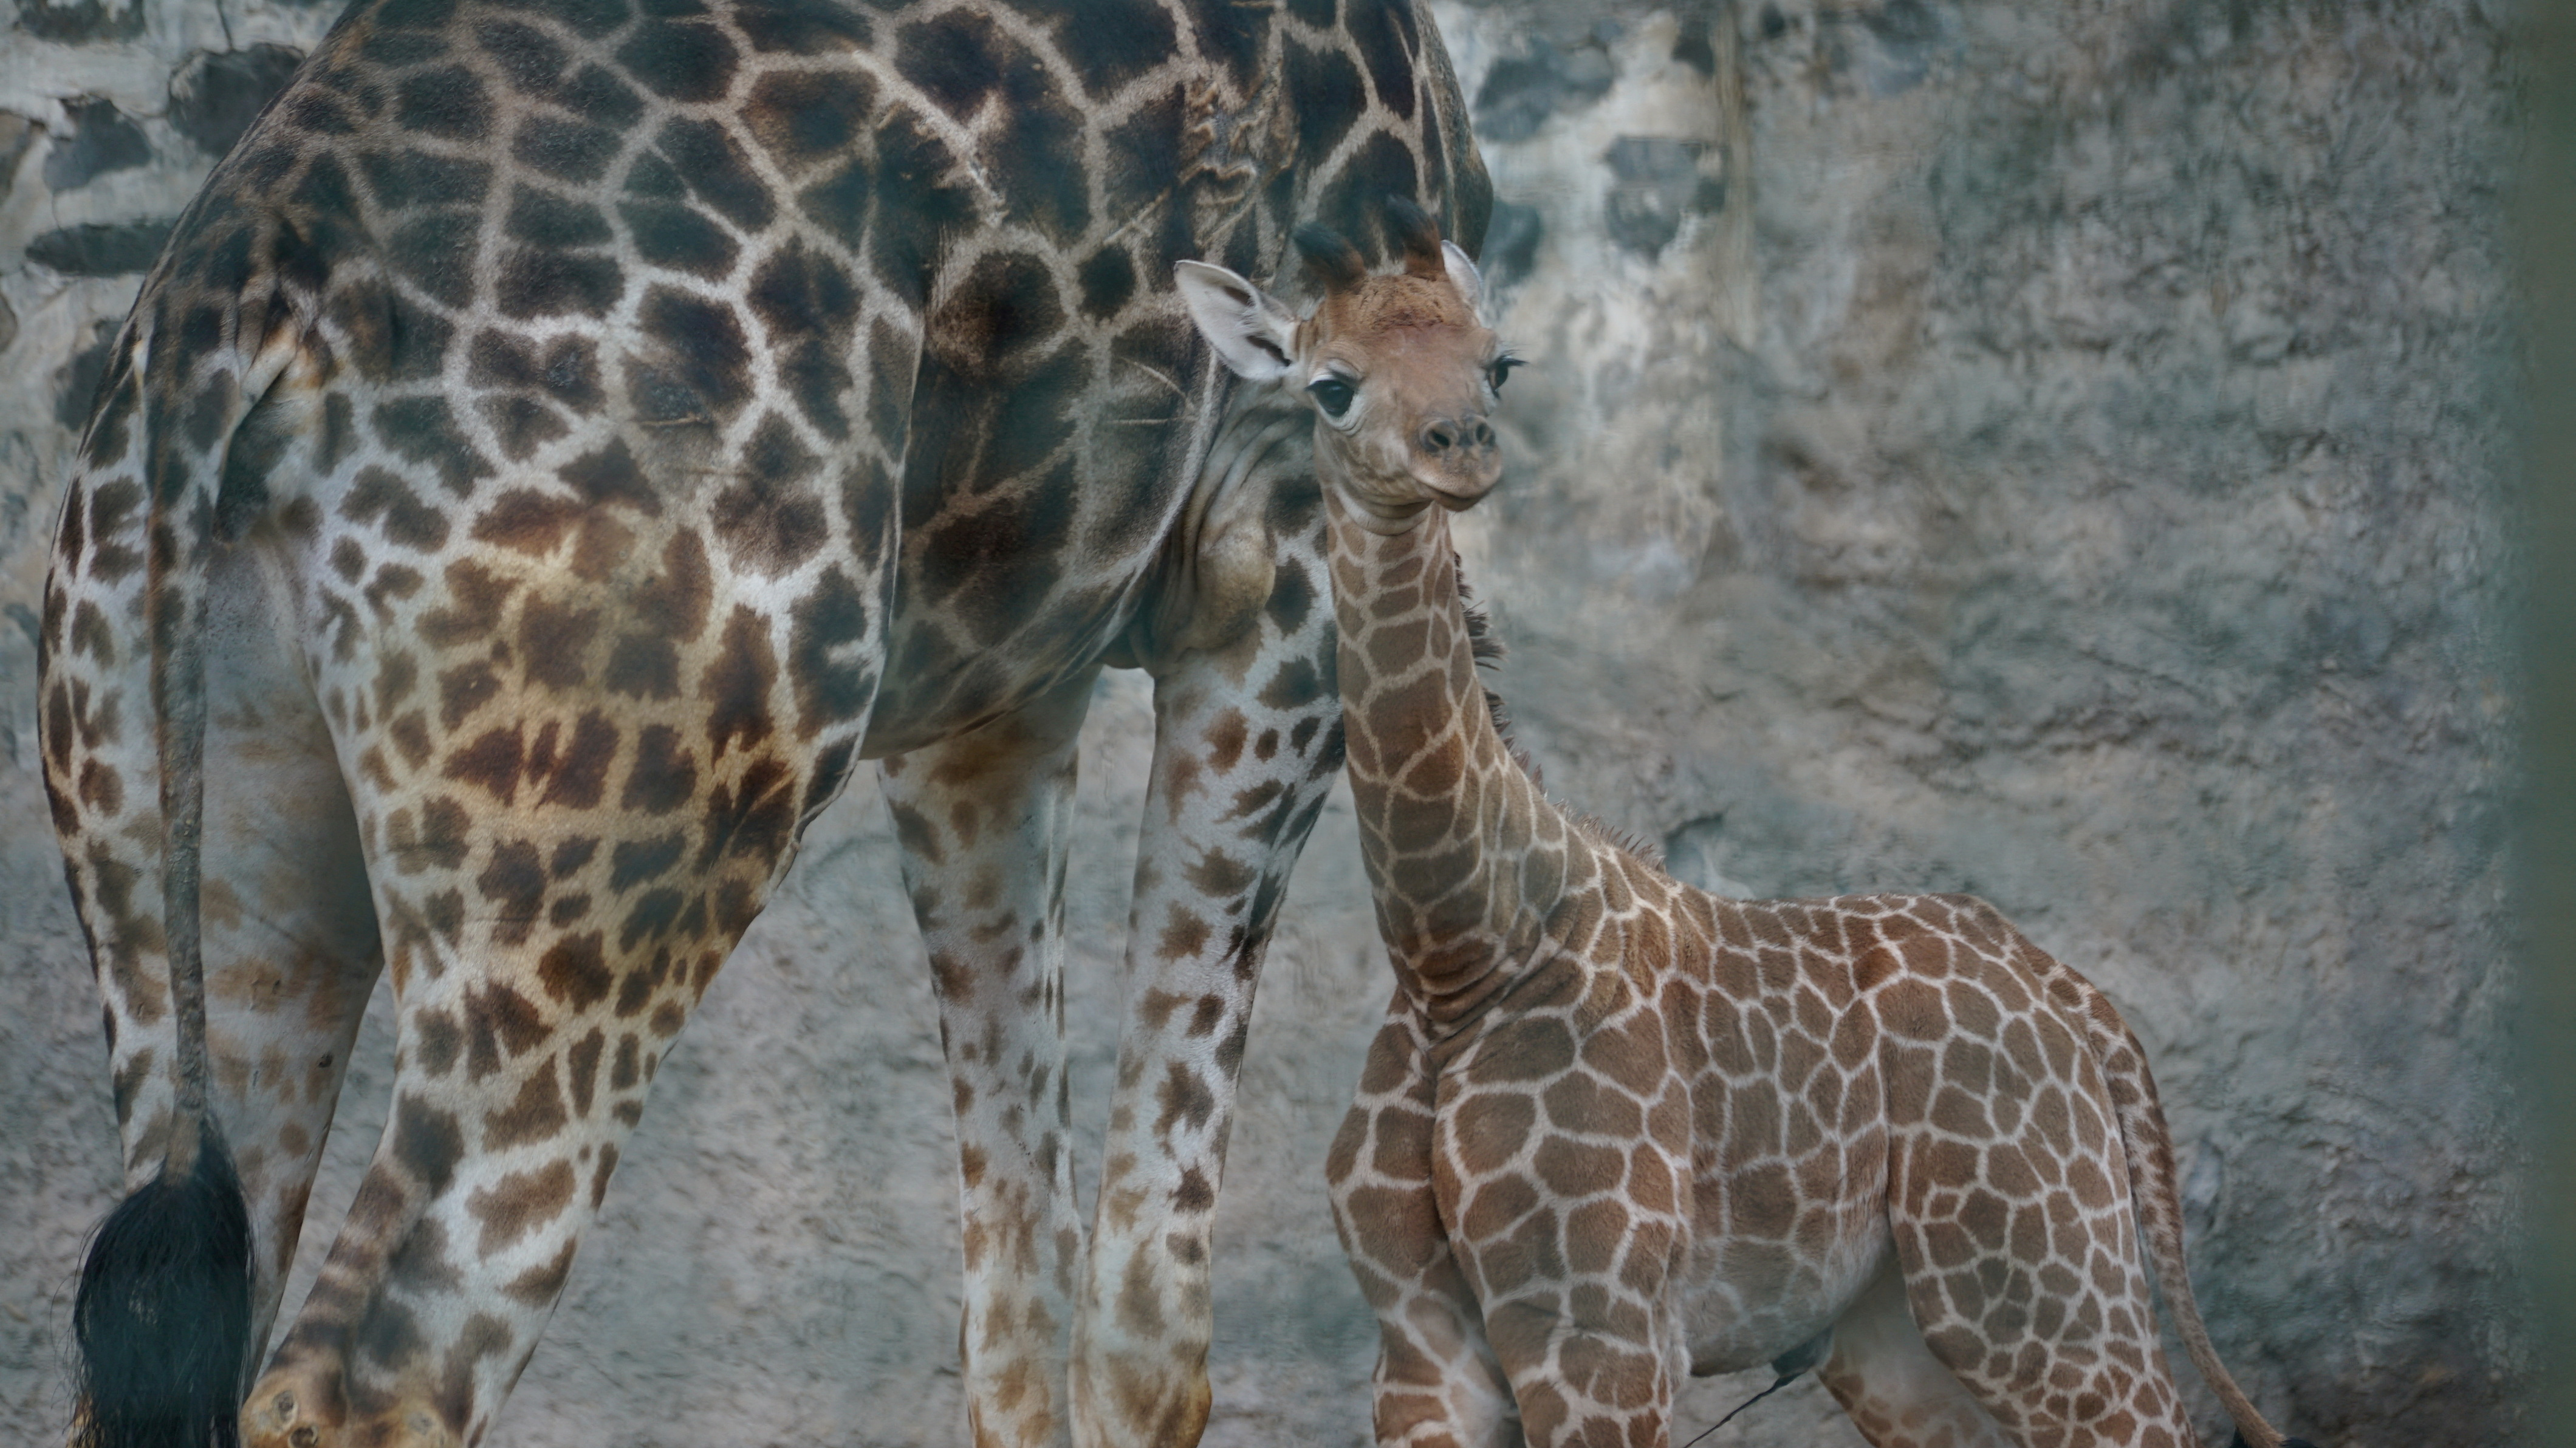 A baby giraffe, which was born in captivity, is displayed in its enclosure for the first time to the public, at the metropolitan park Zoo in Santiago